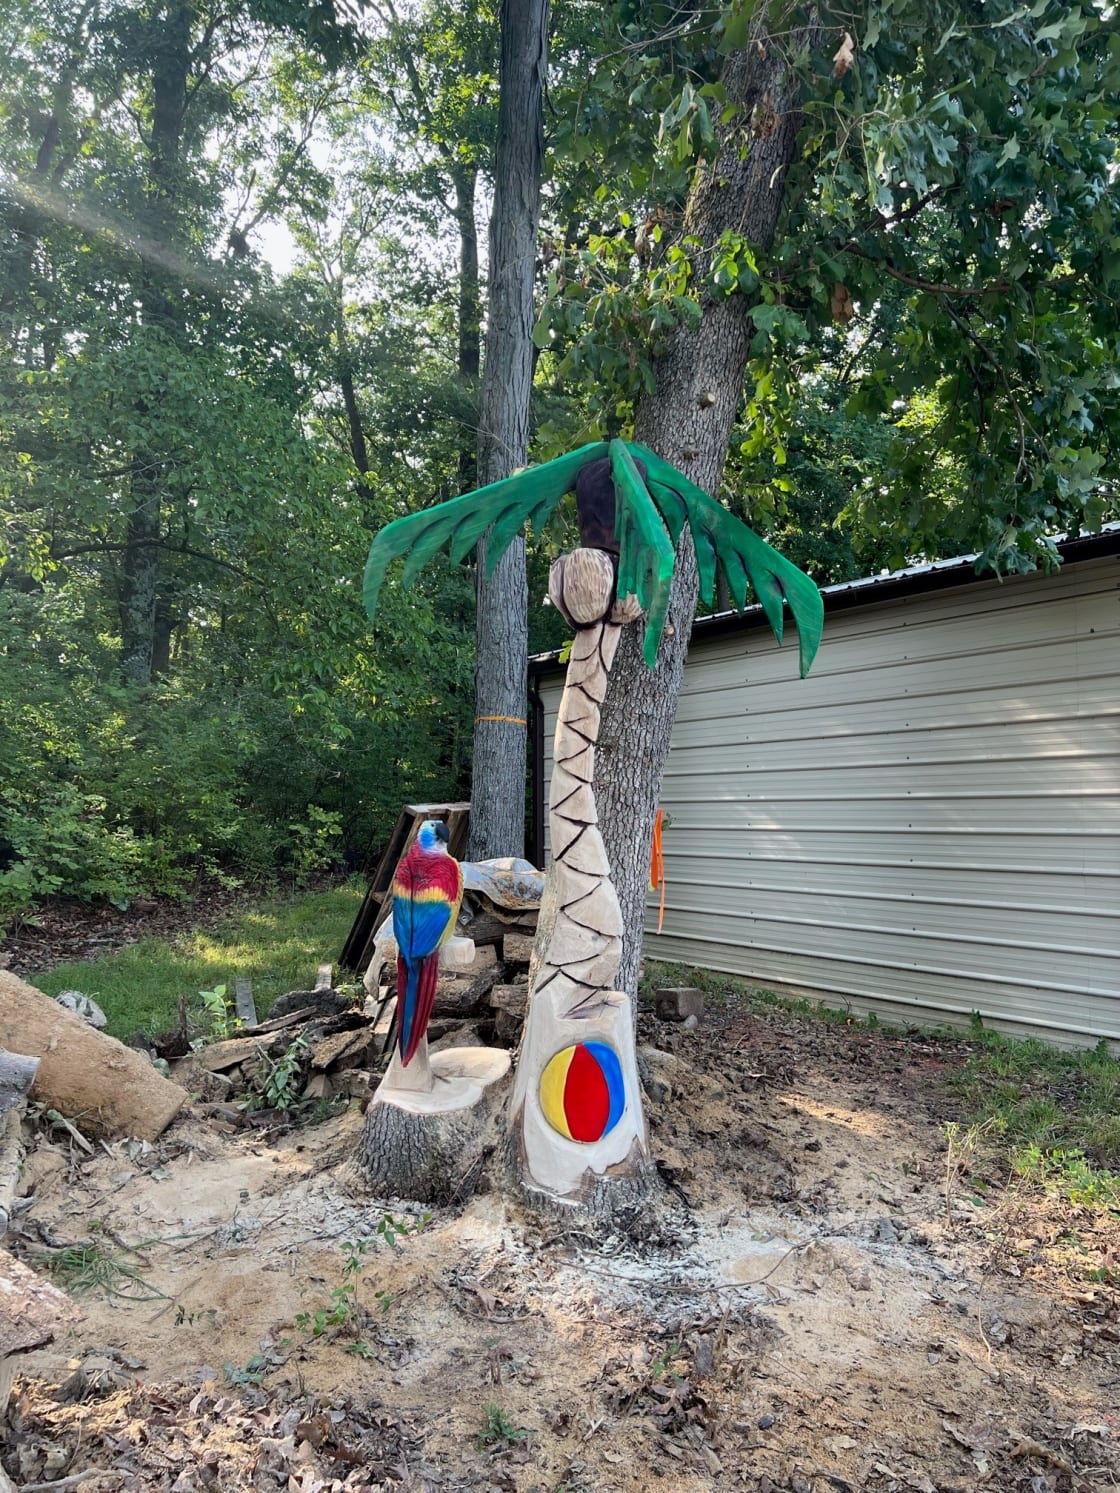 "Welcome to paradise" wood sculpture on our property.